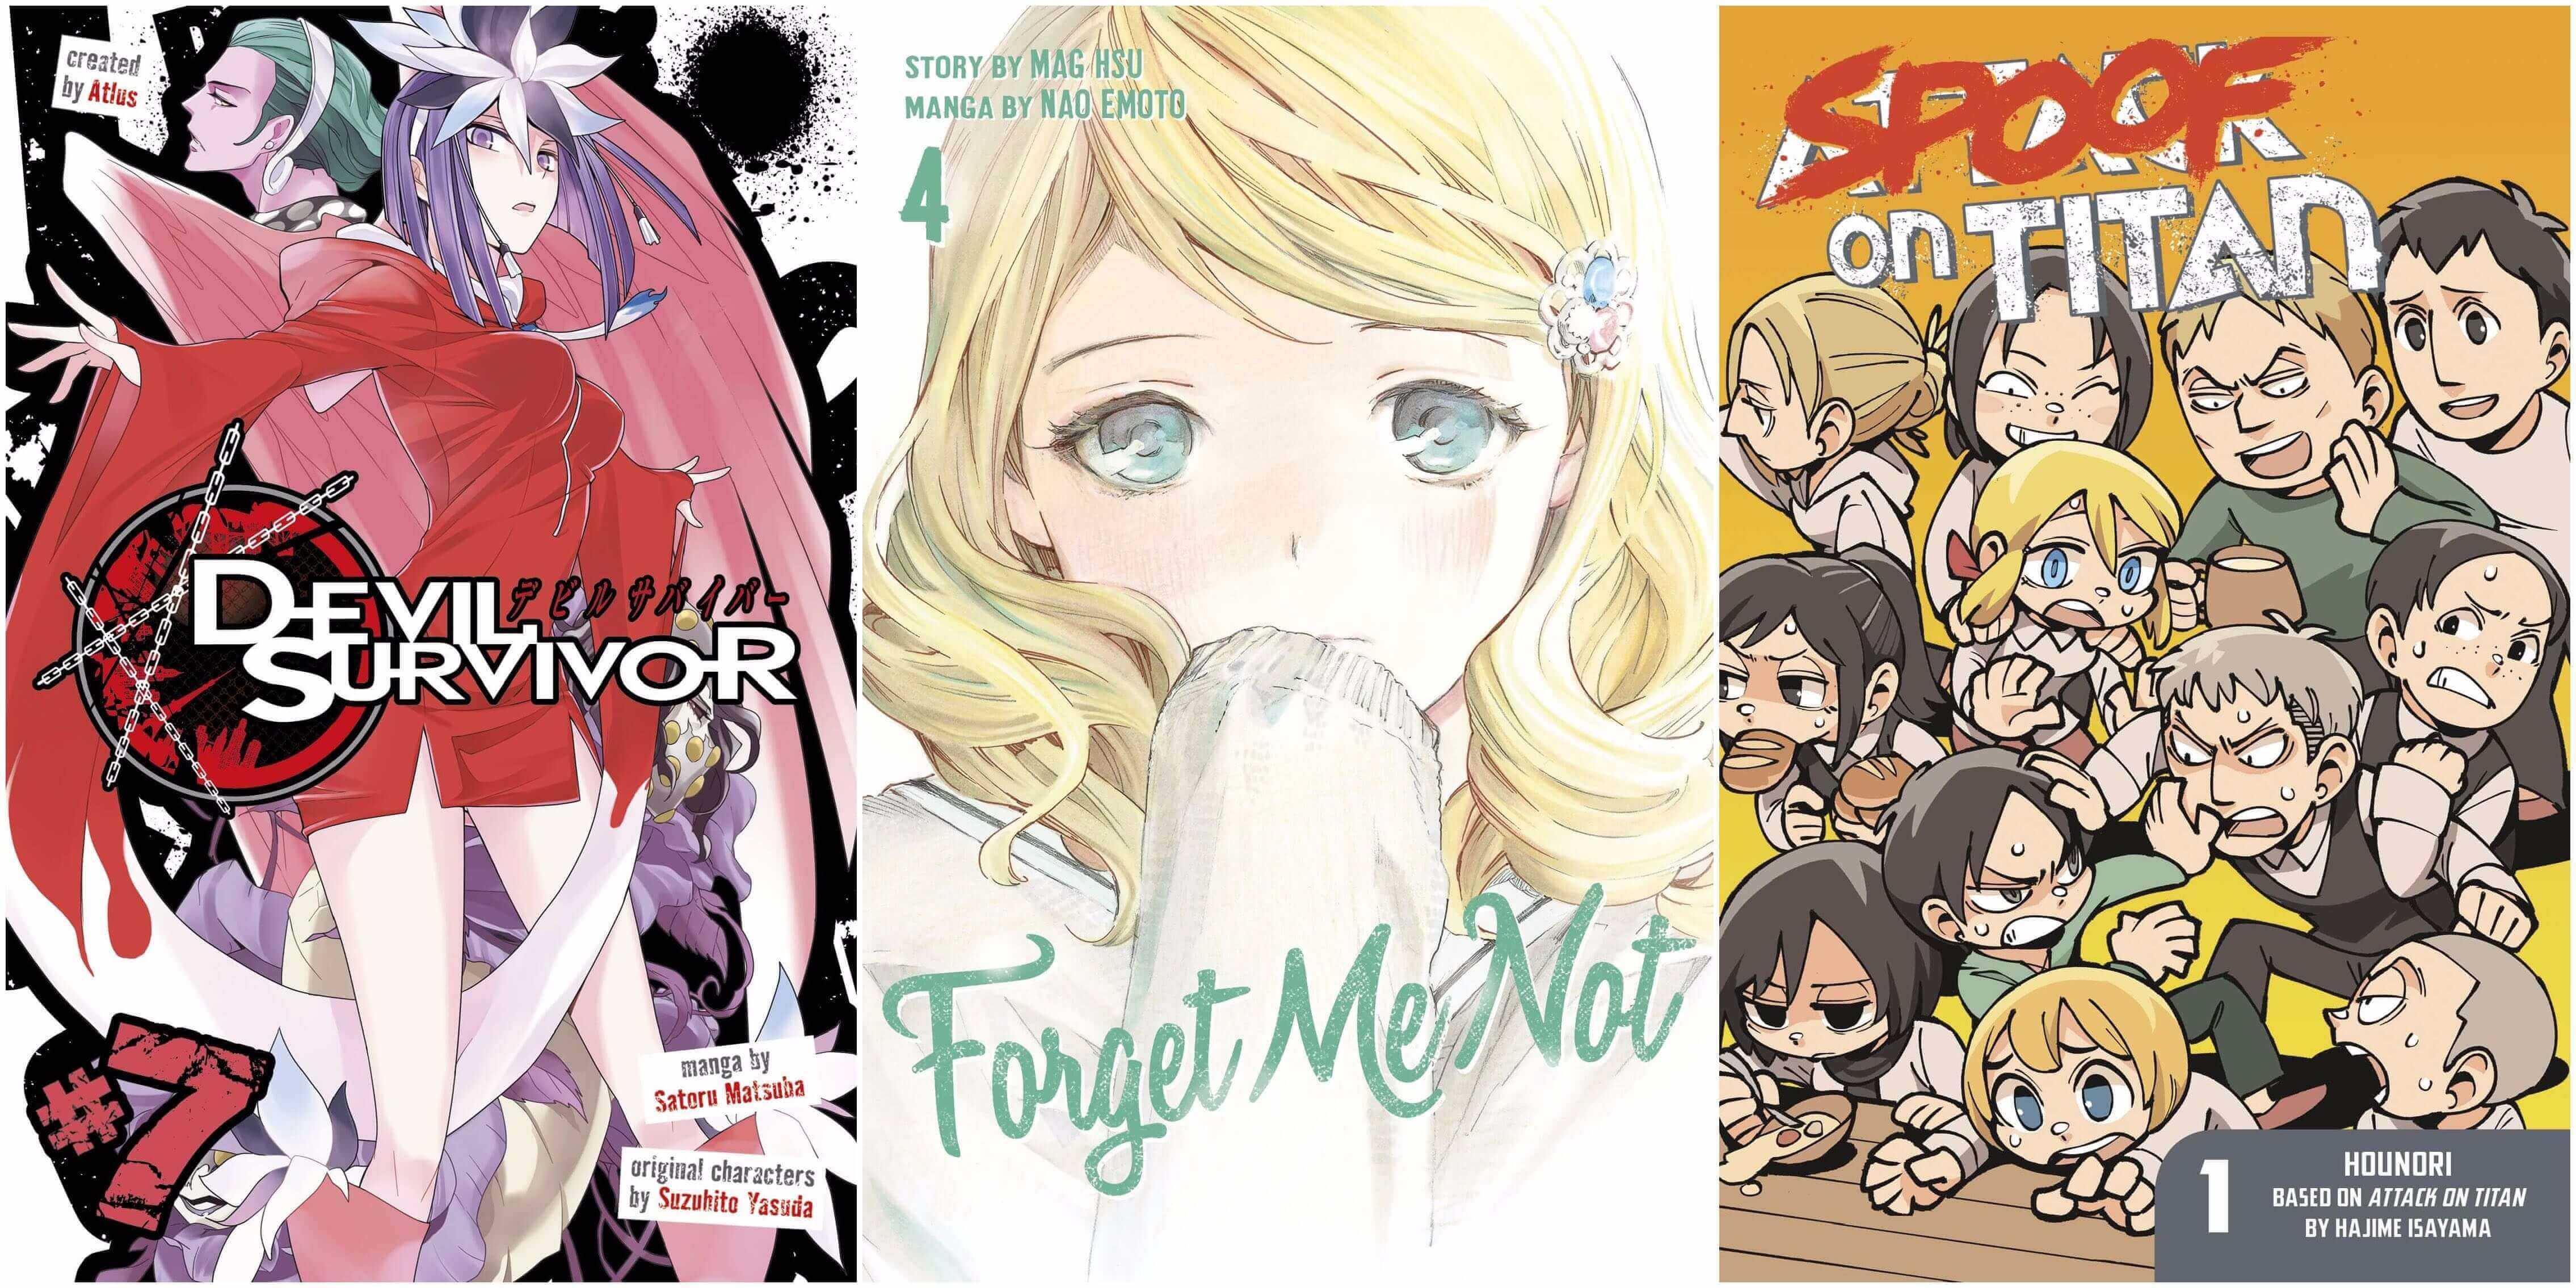 September 2016 Manga Releases Covers for Devil Survivor, Forget Me Not, and Spoof on Titan.